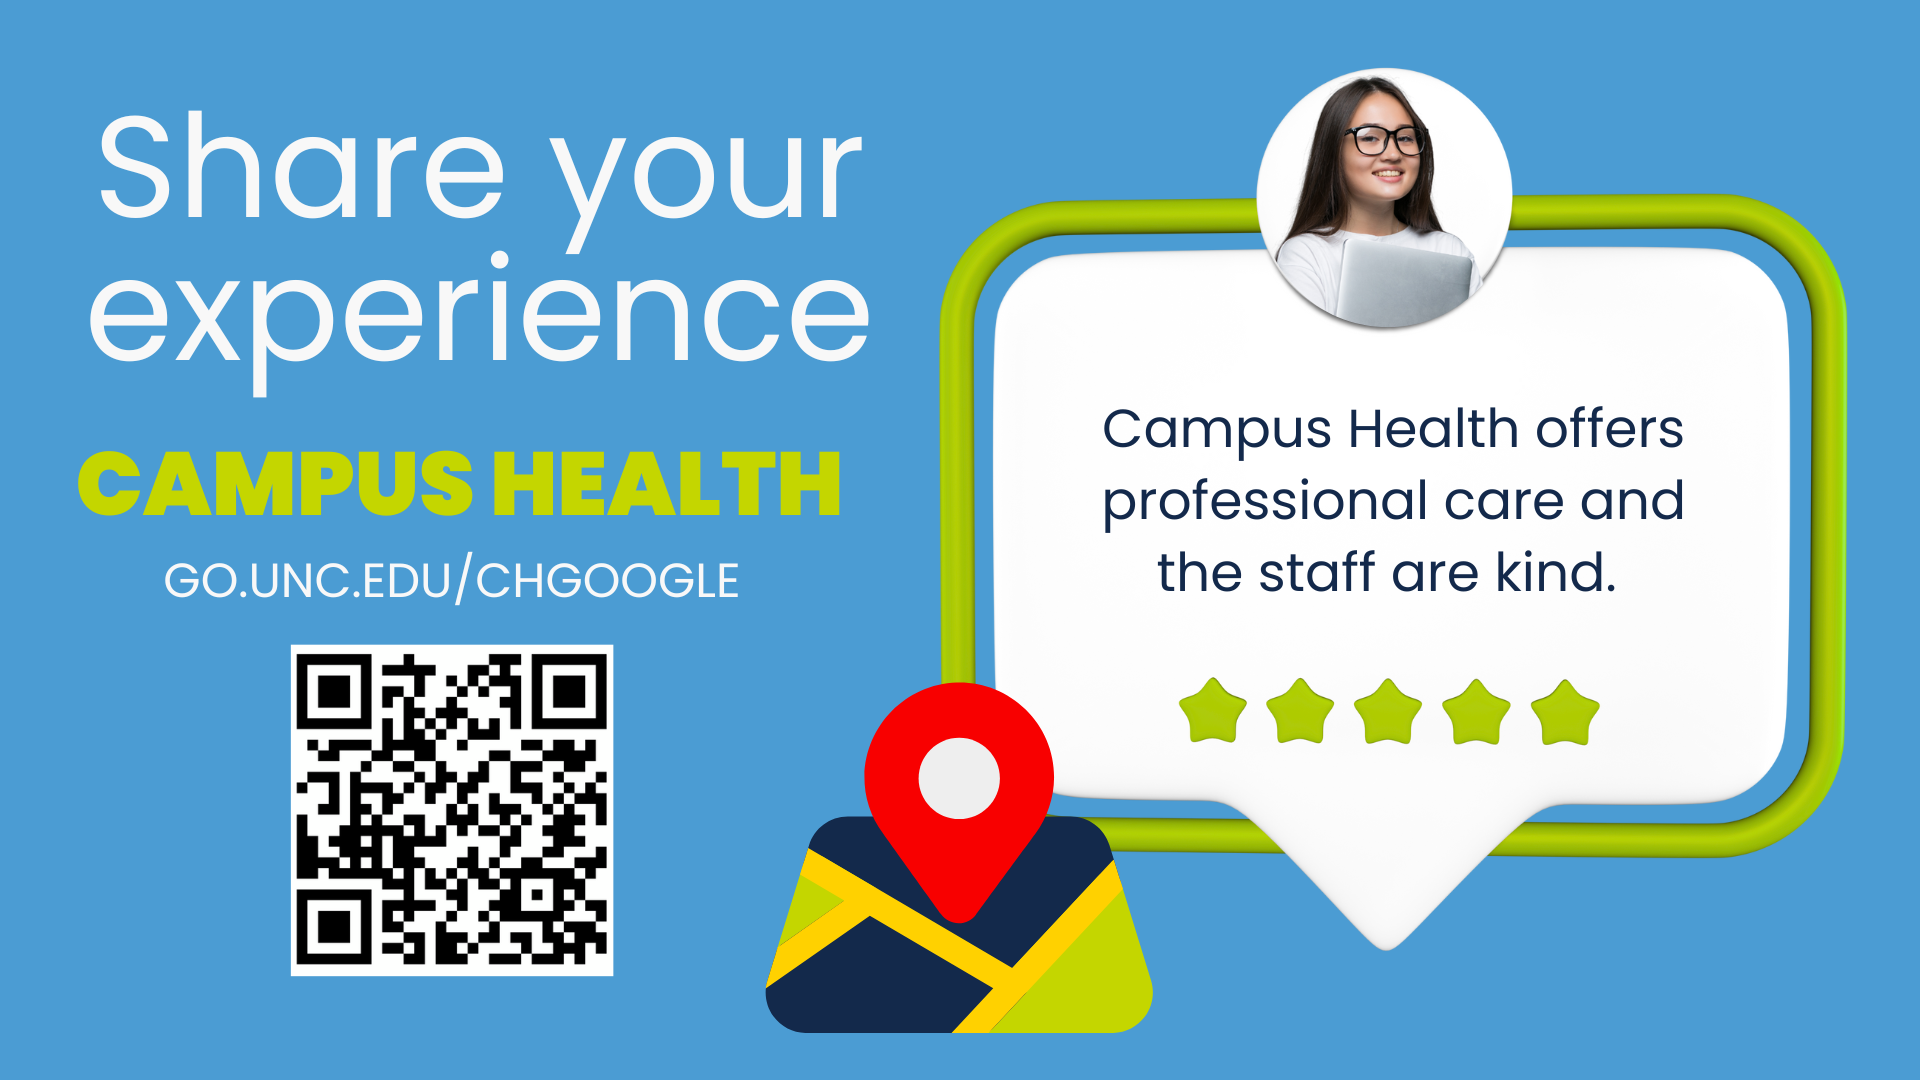 Share your experience with Campus Health